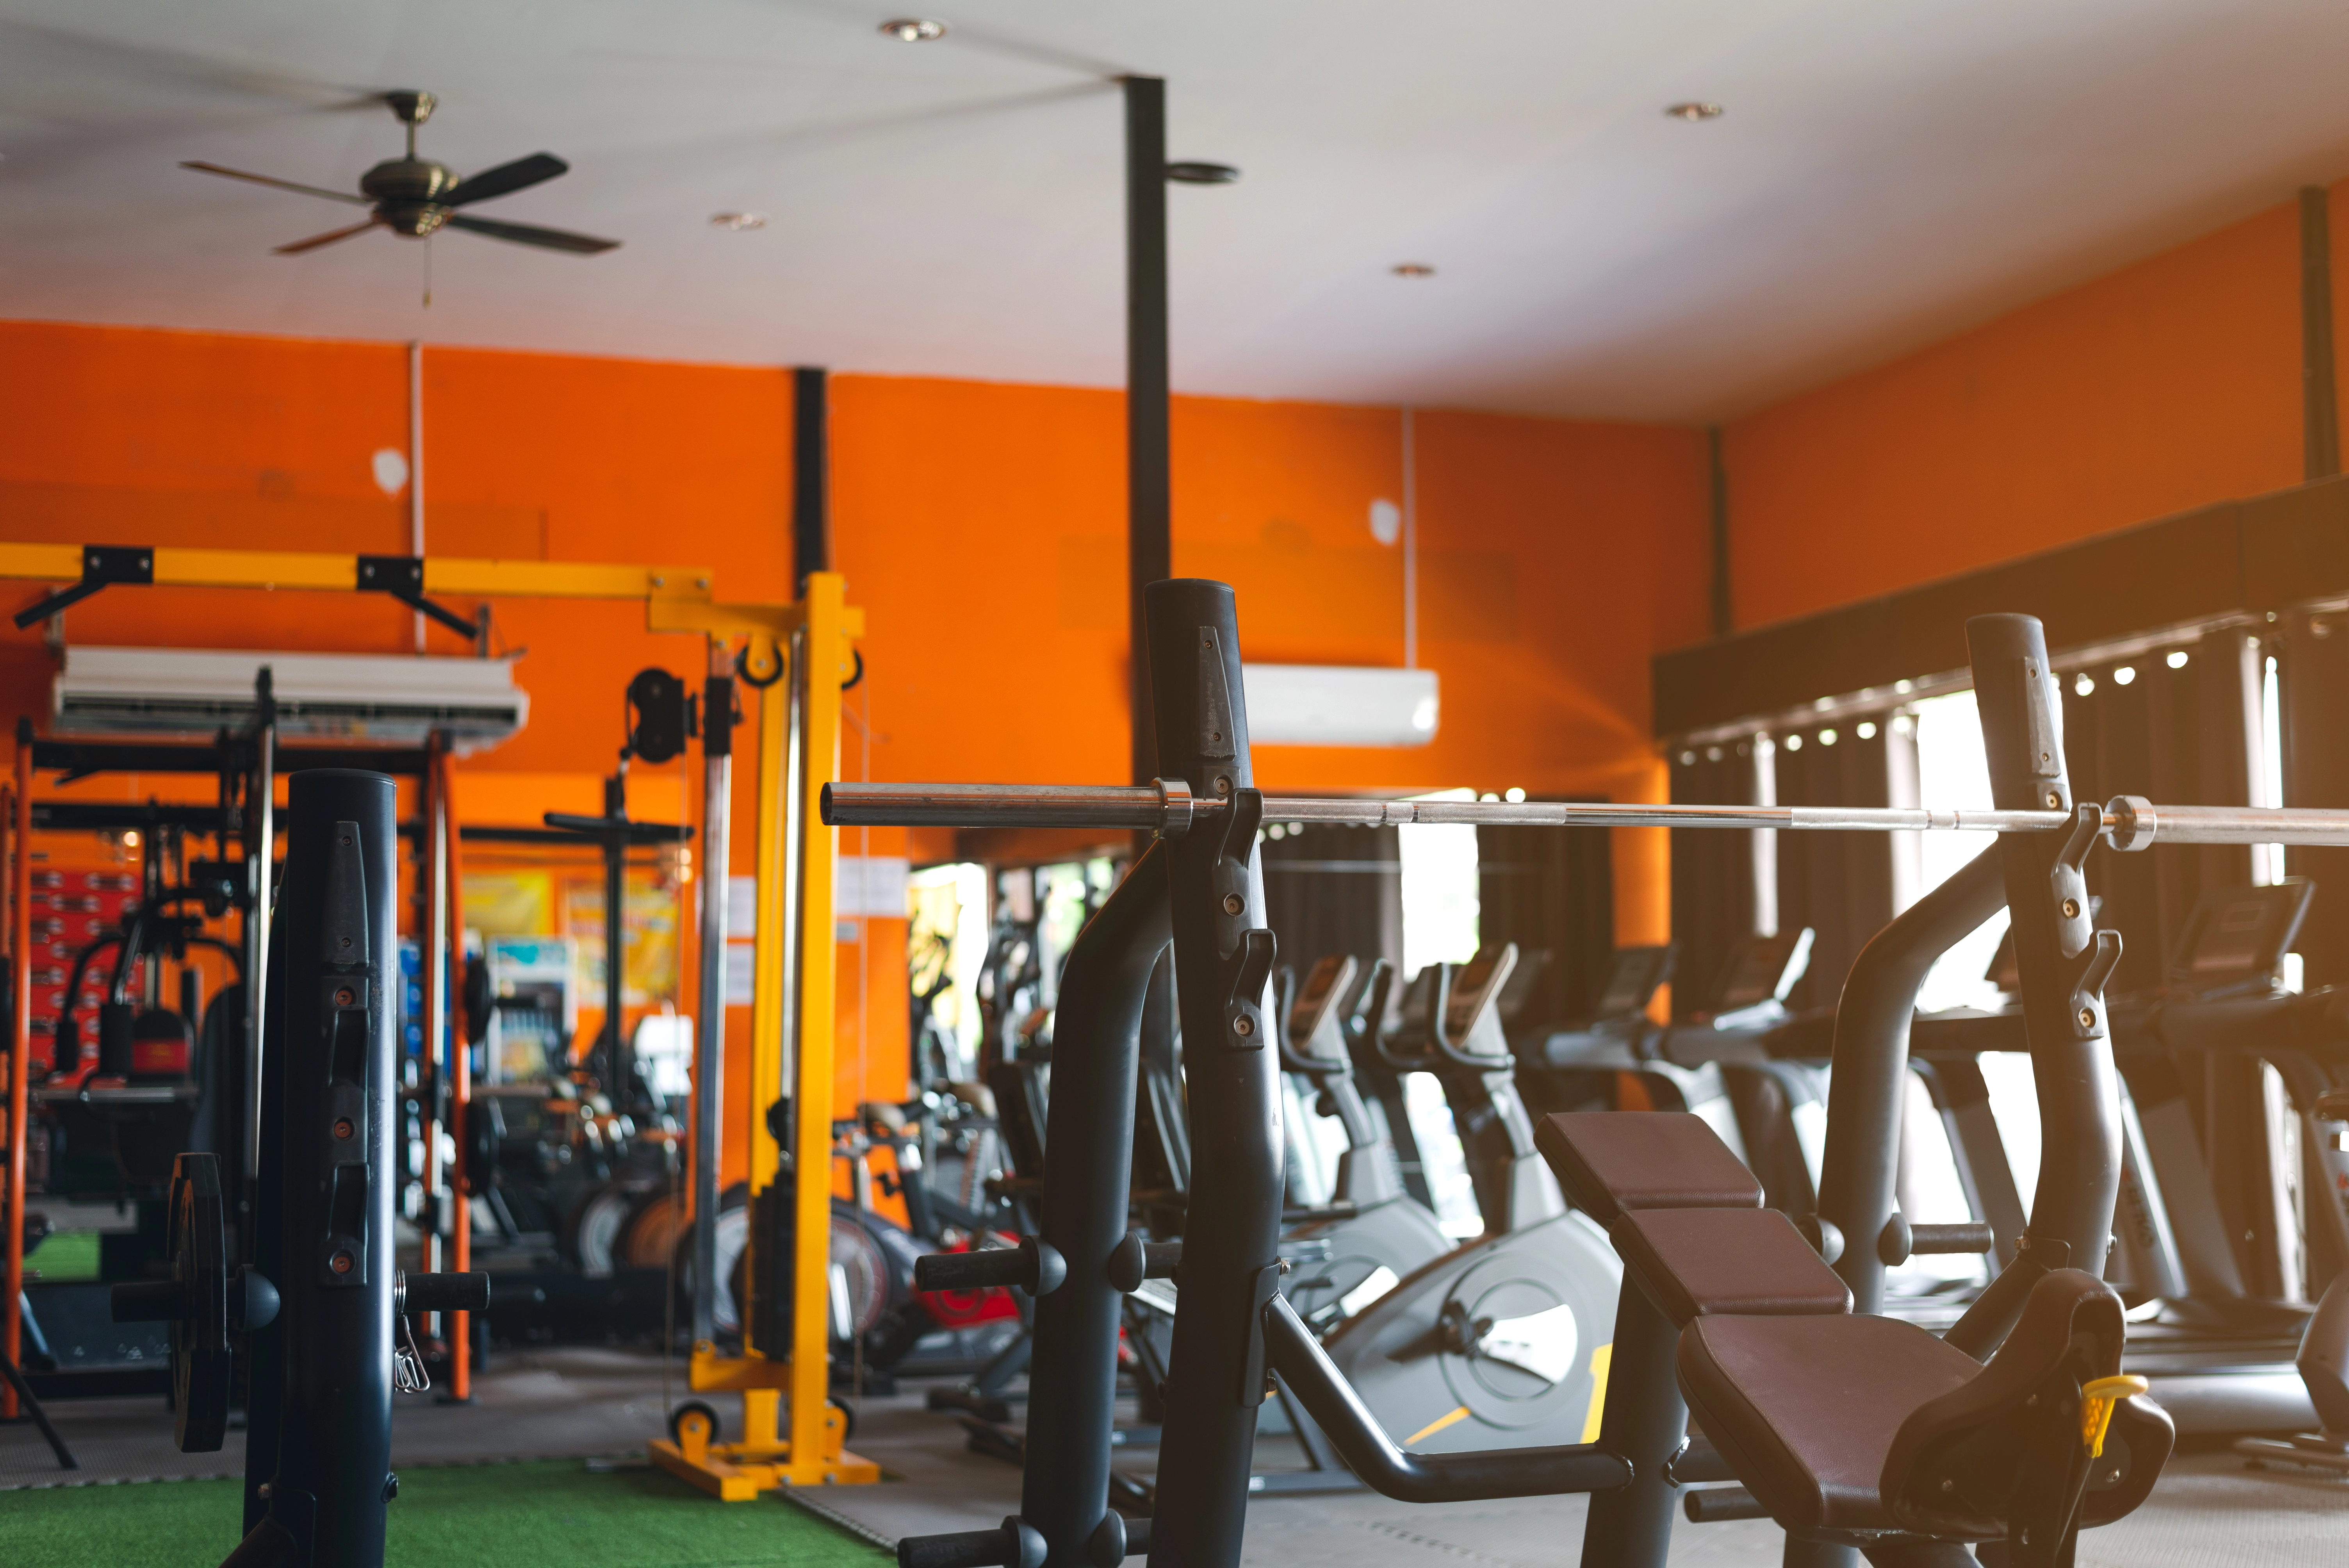 Gym with several treadmills, benches, stationary bikes, and more. Walls are painted bright orange.